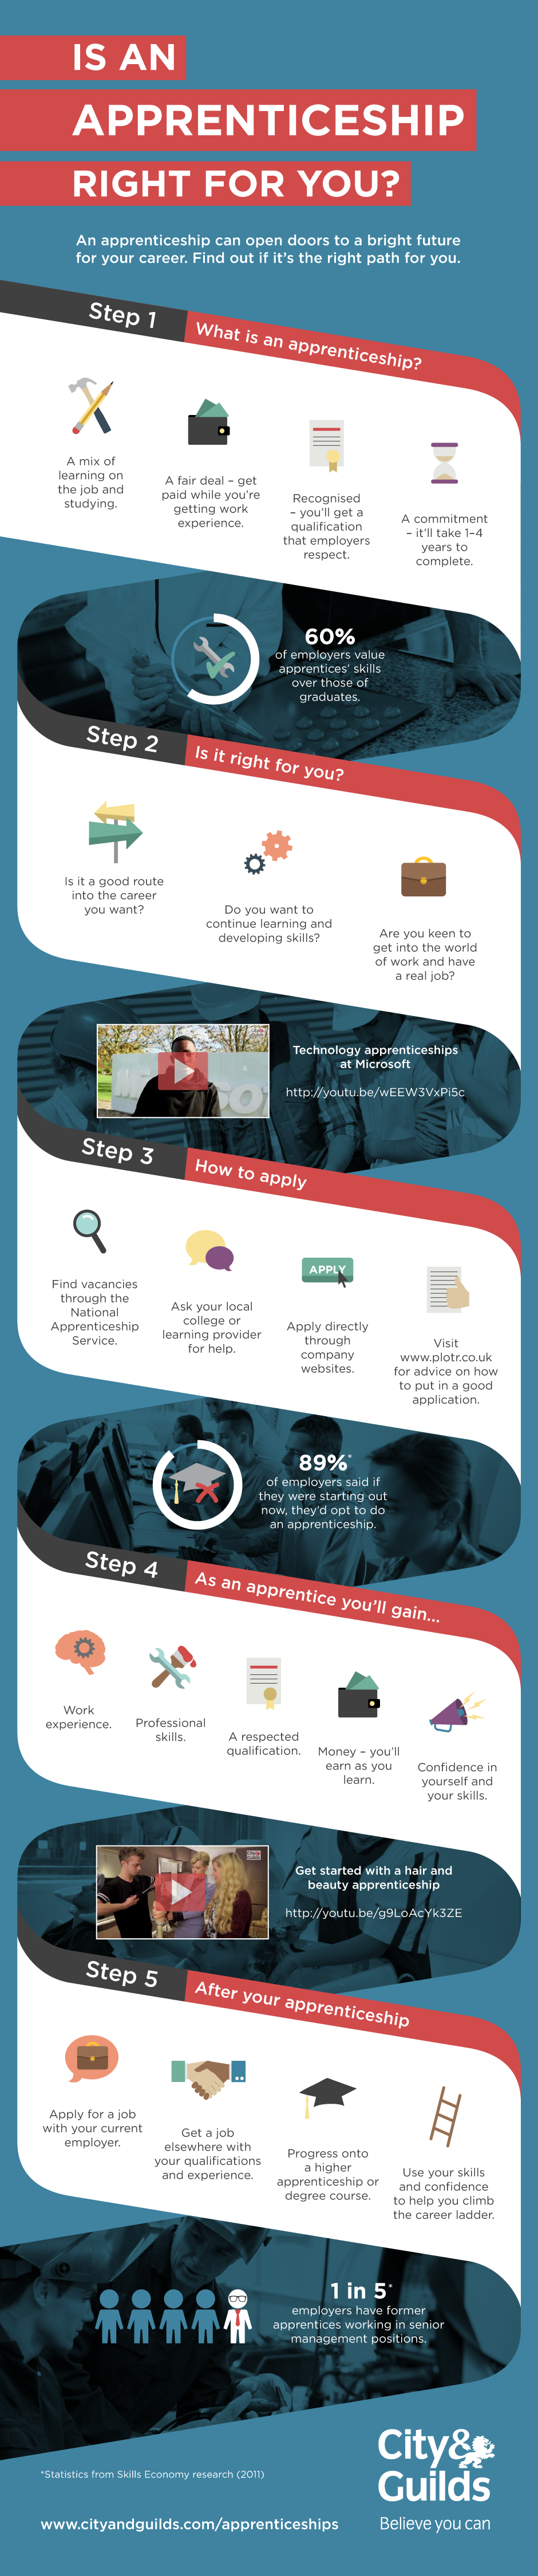 Infographic: is an apprenticeship right for you?